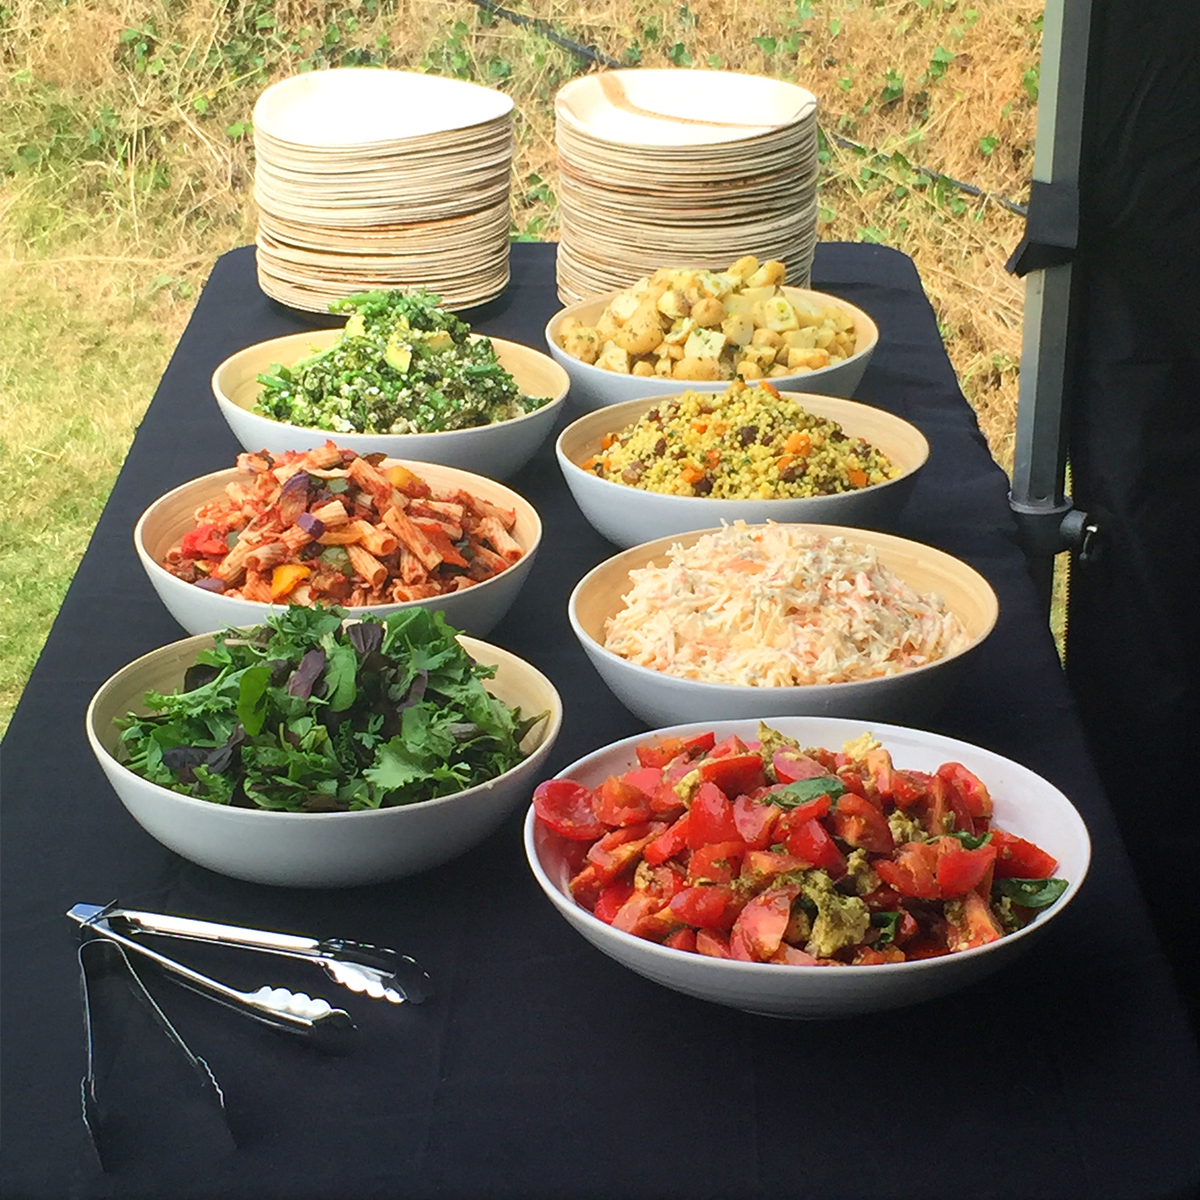 Full selection of delicious salads freshly prepared so you don't have to! 